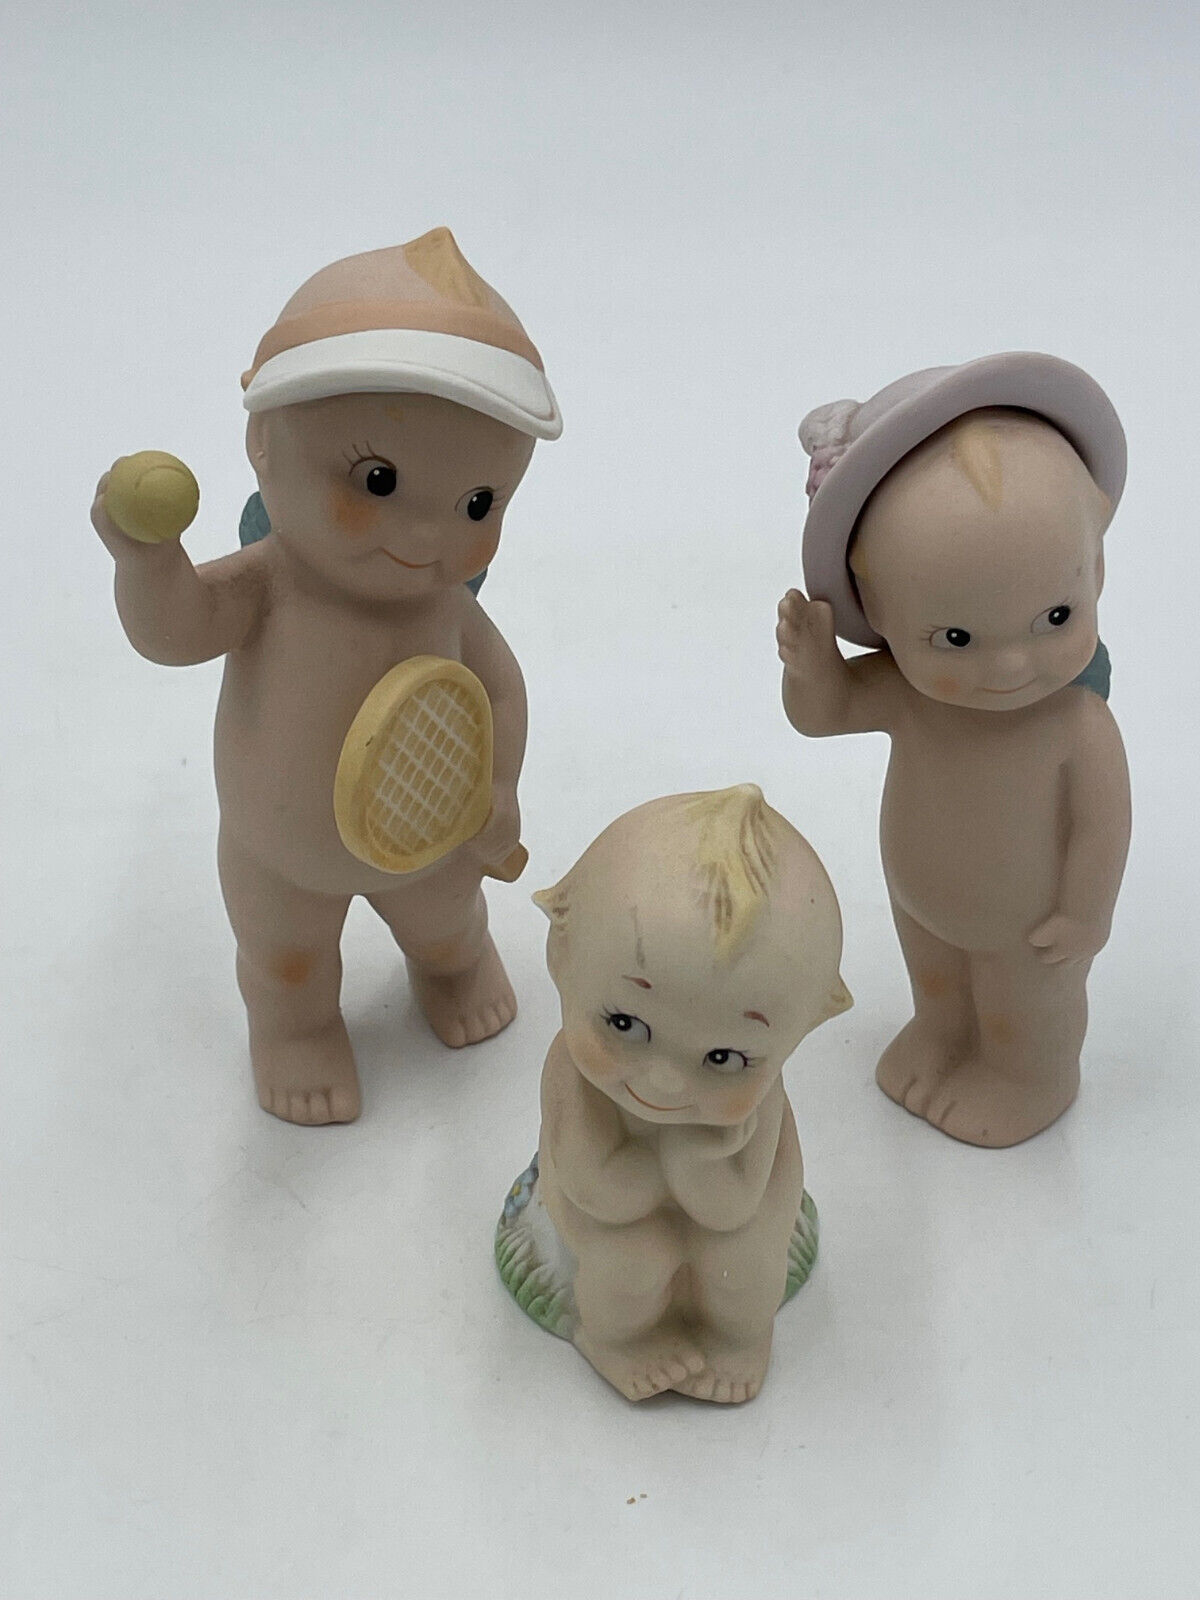 3 Vintage Jesco Kewpies Tennis With Hat Seated 1990s Figurines Collectible Decor